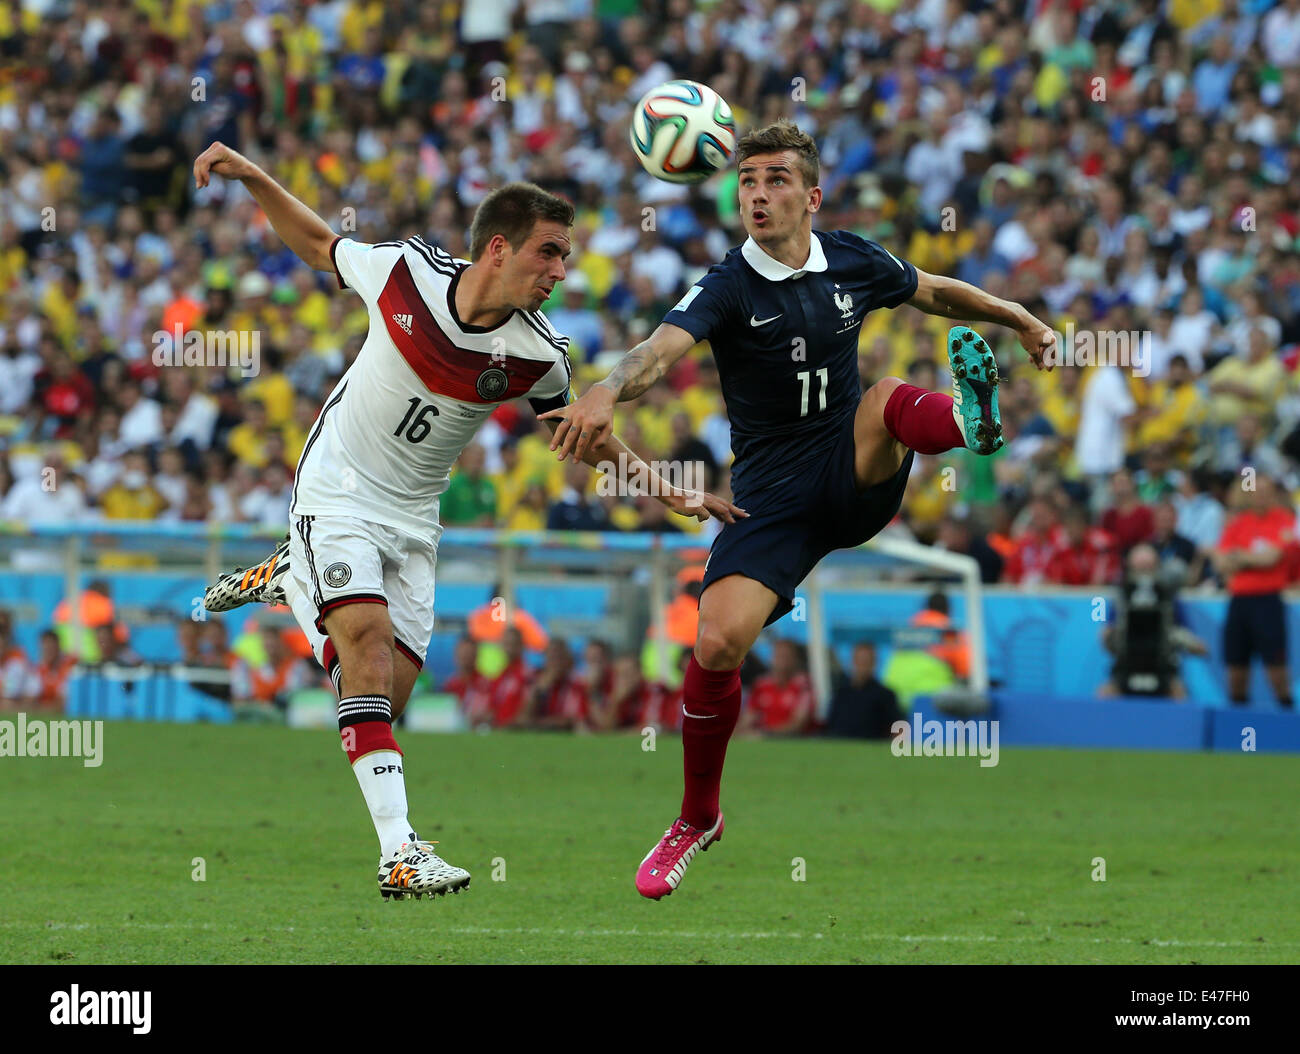 Rio De Janerio, Brazil. 04th July, 2014. FIFA World Cup 2014 quarter final soccer match between France and Germany at Estadio do Maracana in Rio de Janeiro, Brazil. Griezmann controls the ball pressed by Lahm Credit:  Action Plus Sports/Alamy Live News Stock Photo